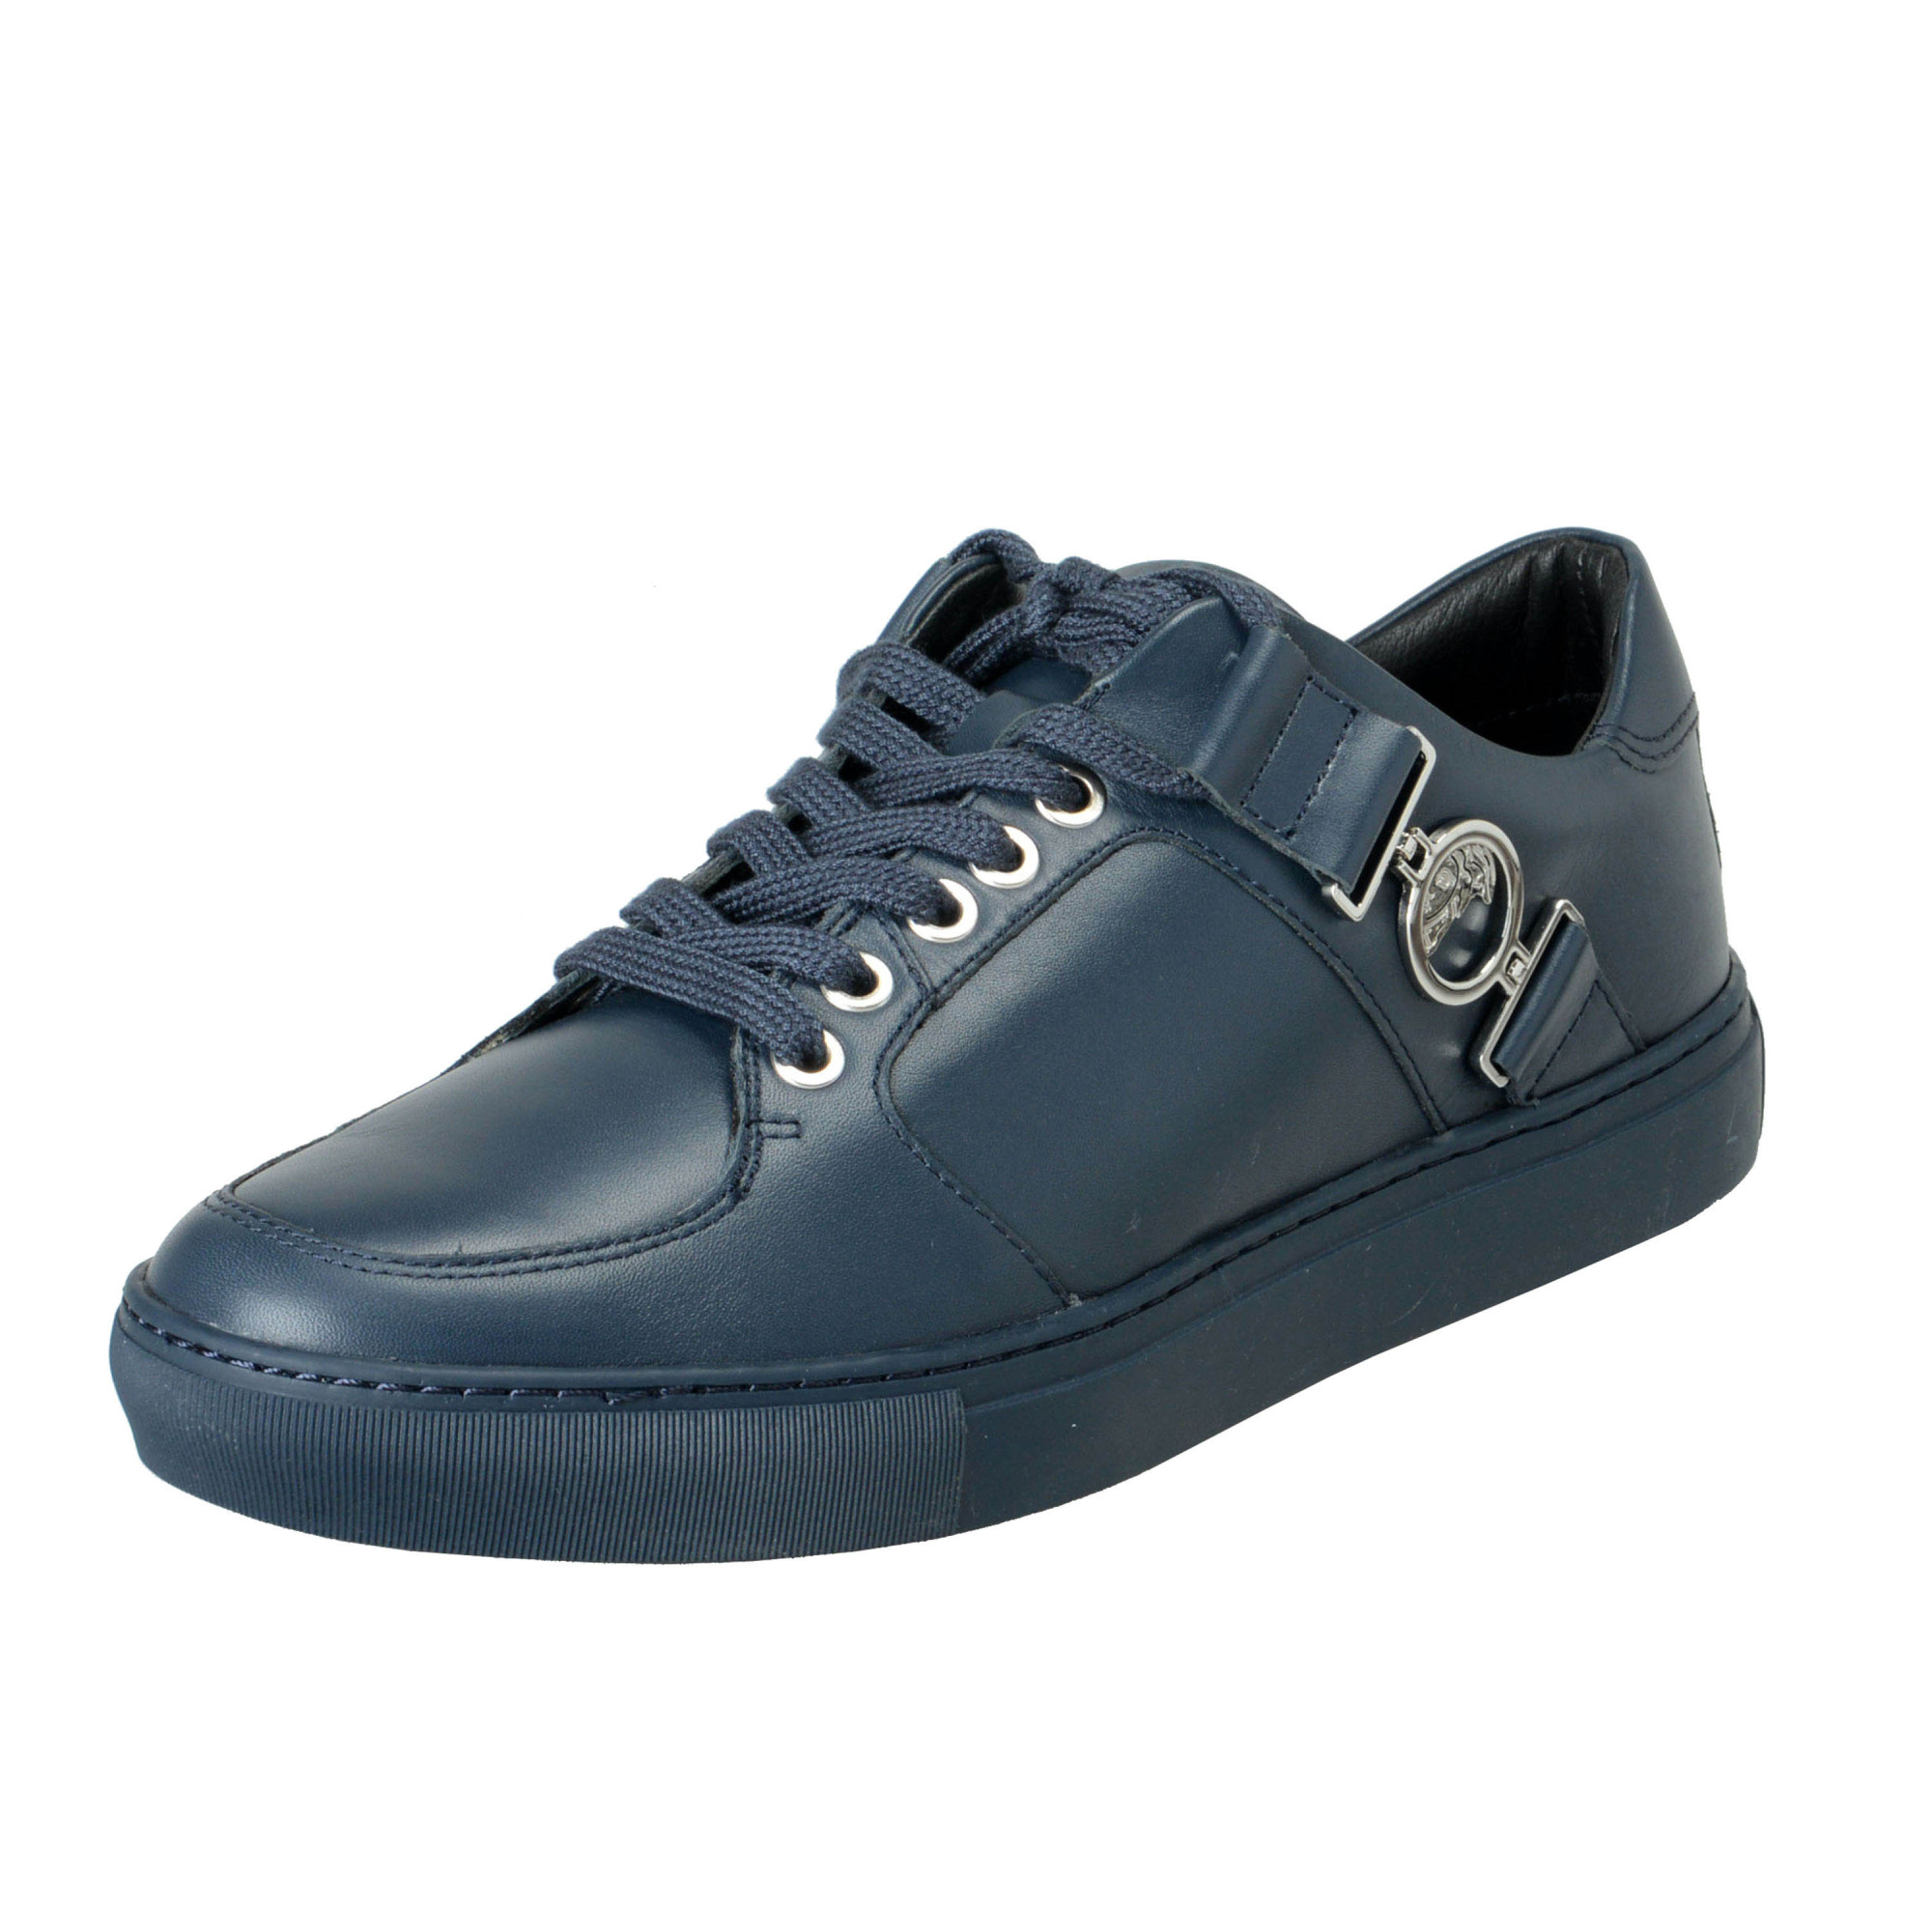 Versace Collection Men's Blue Leather Fashion Sneakers Shoes